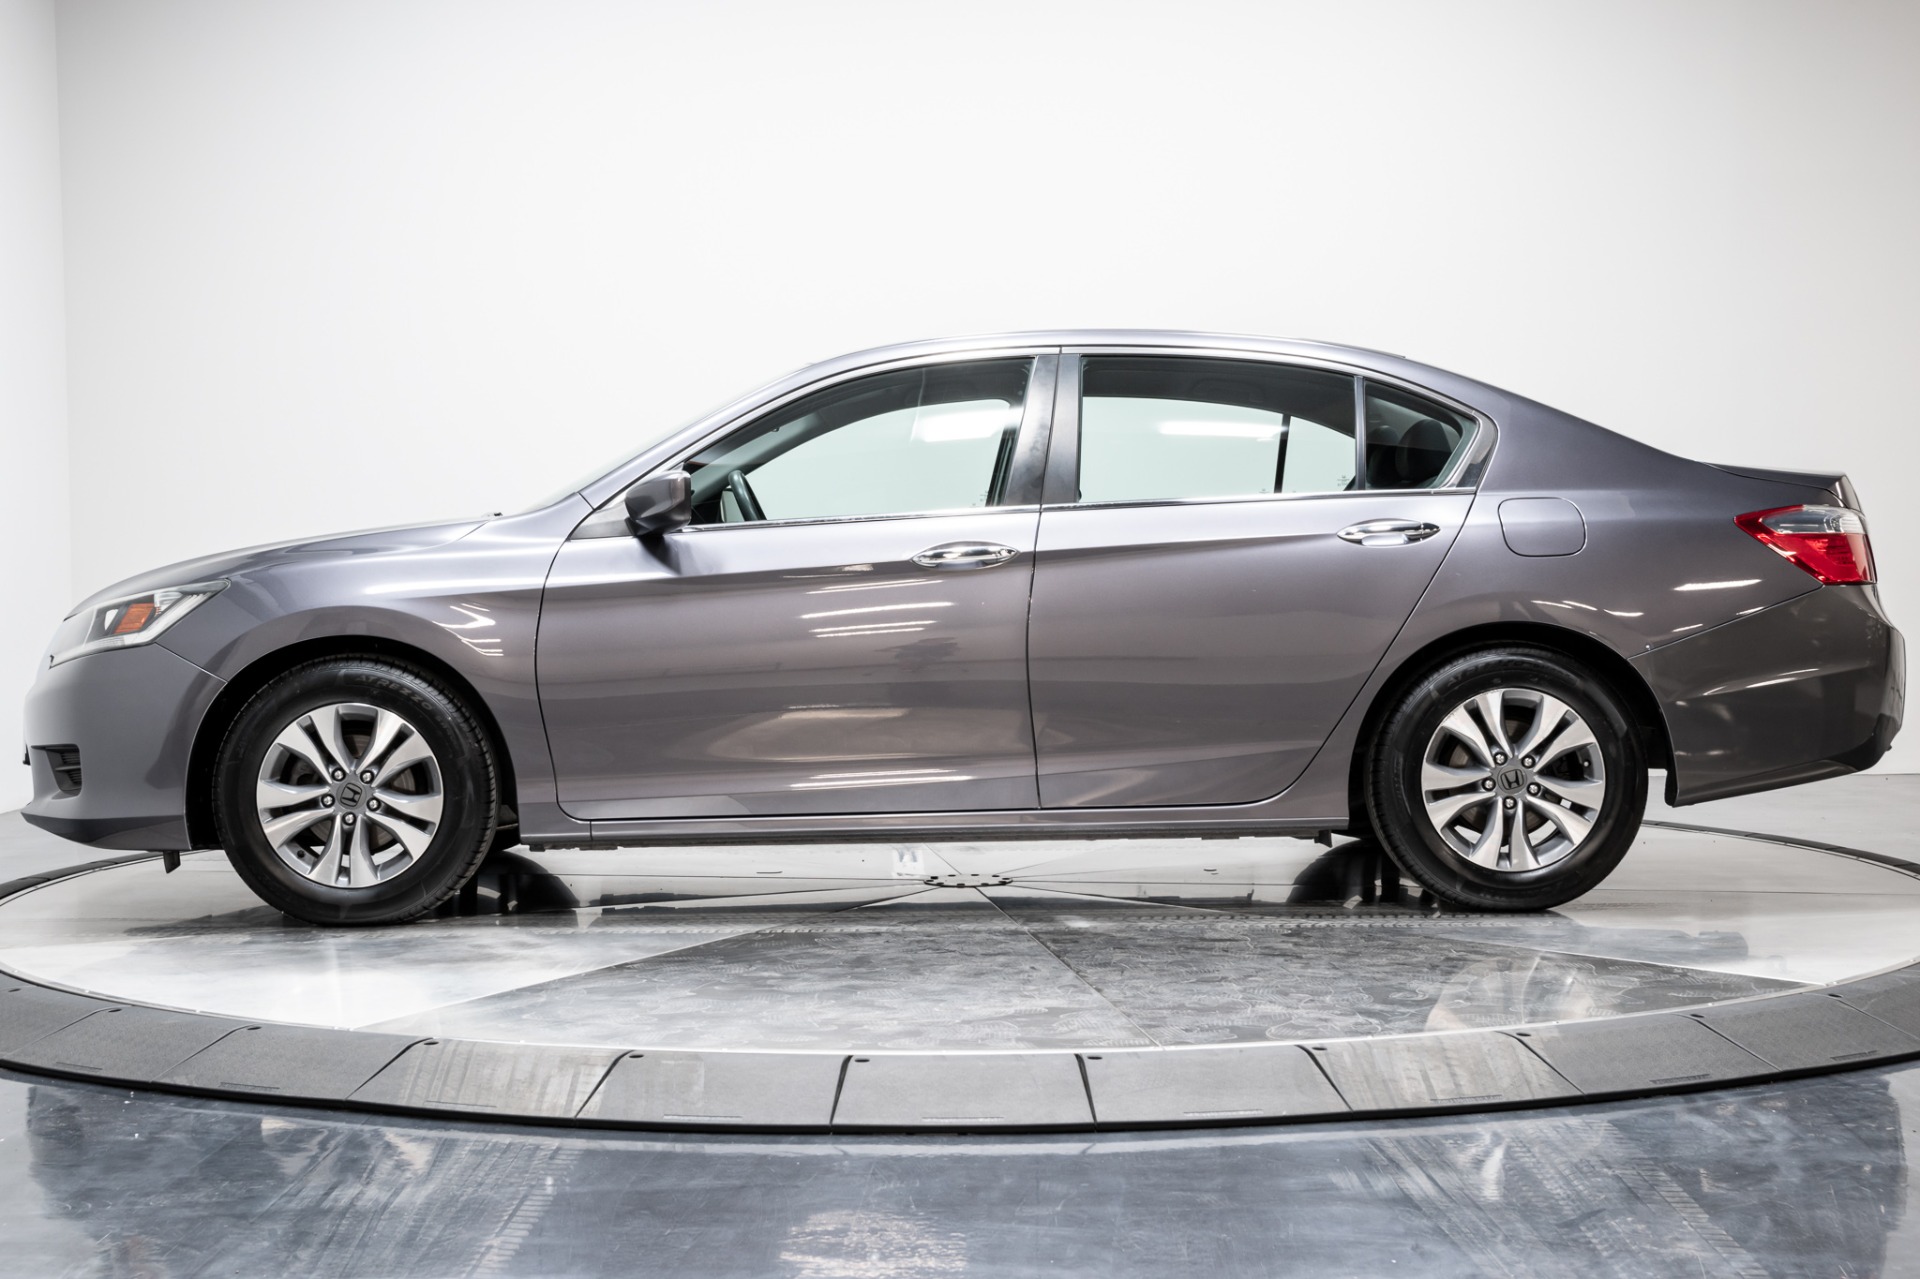 Used 2014 Honda Accord Lx For Sale 8993 Perfect Auto Collection